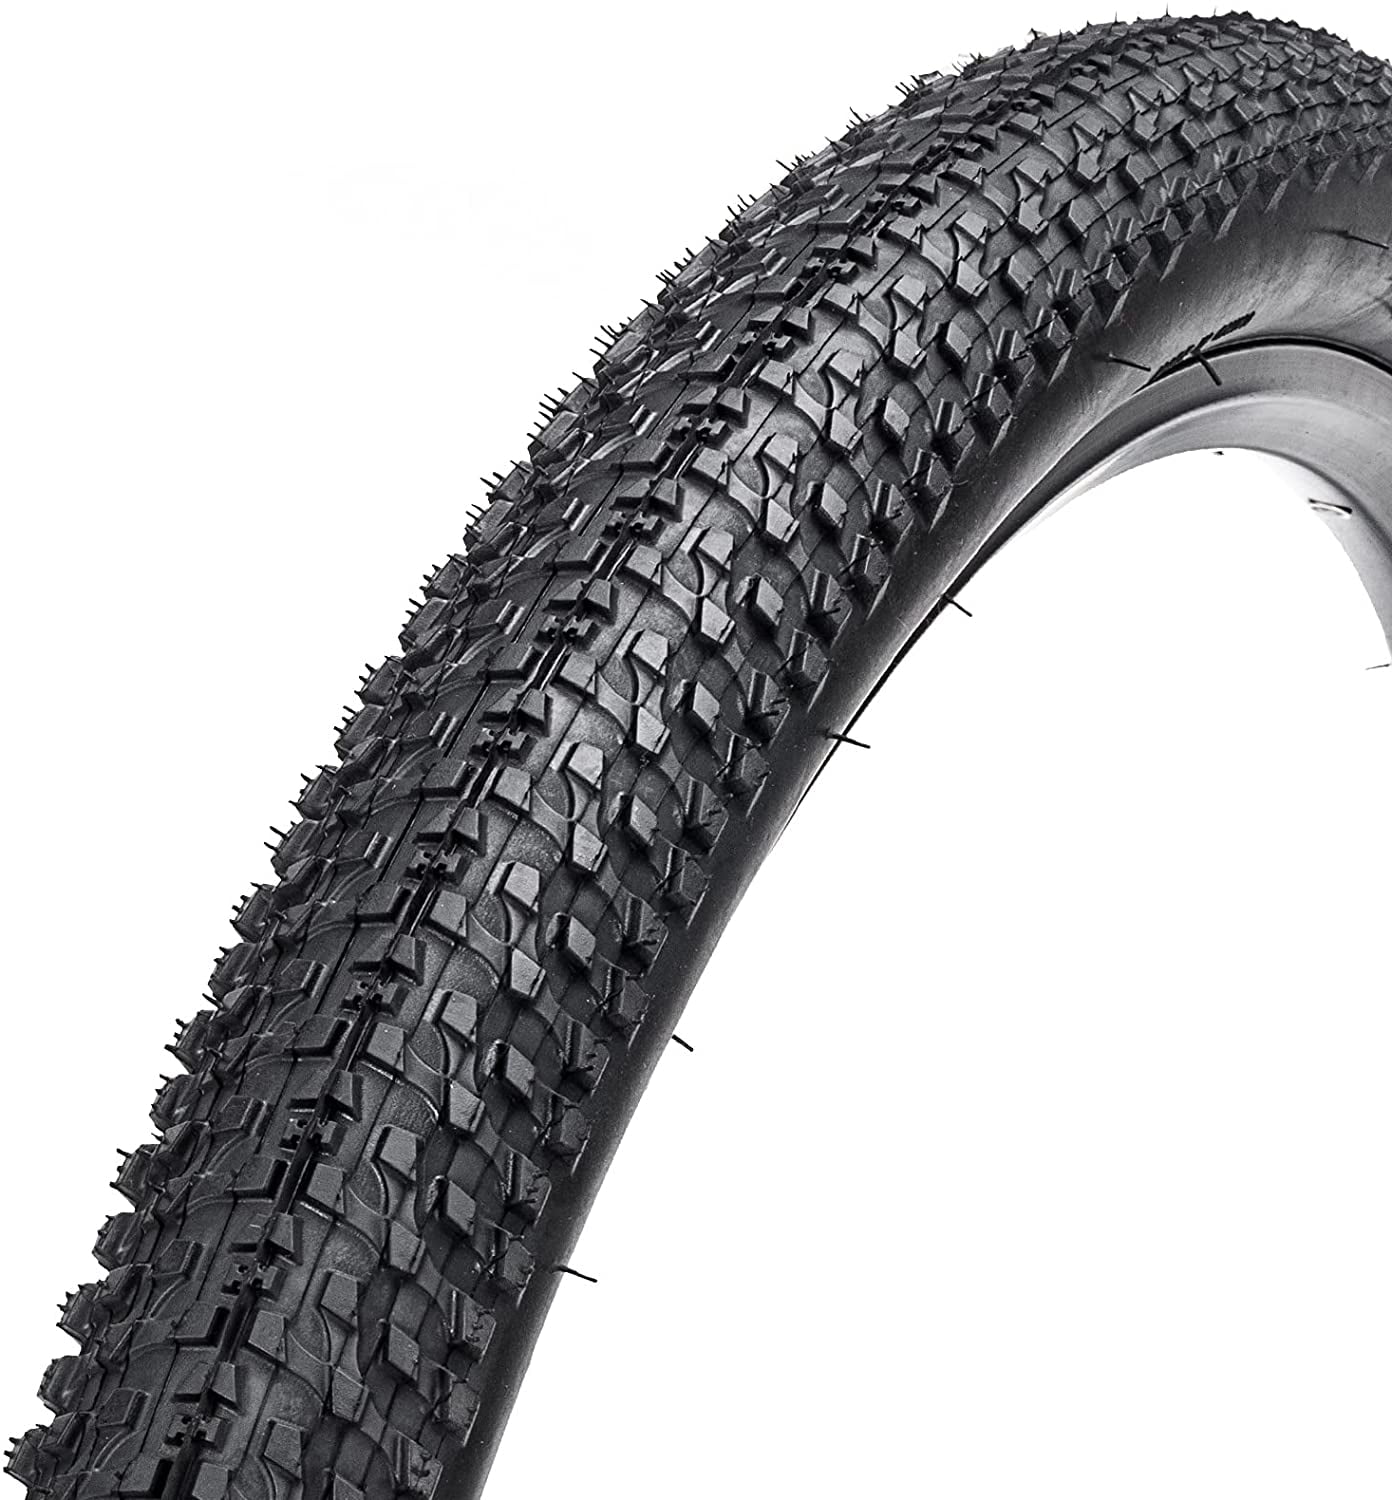 Pair of Kenda Mountain Bike Tires 27.5 × 2.35 inch MTB Fat Bicycle Clincher Tyre 